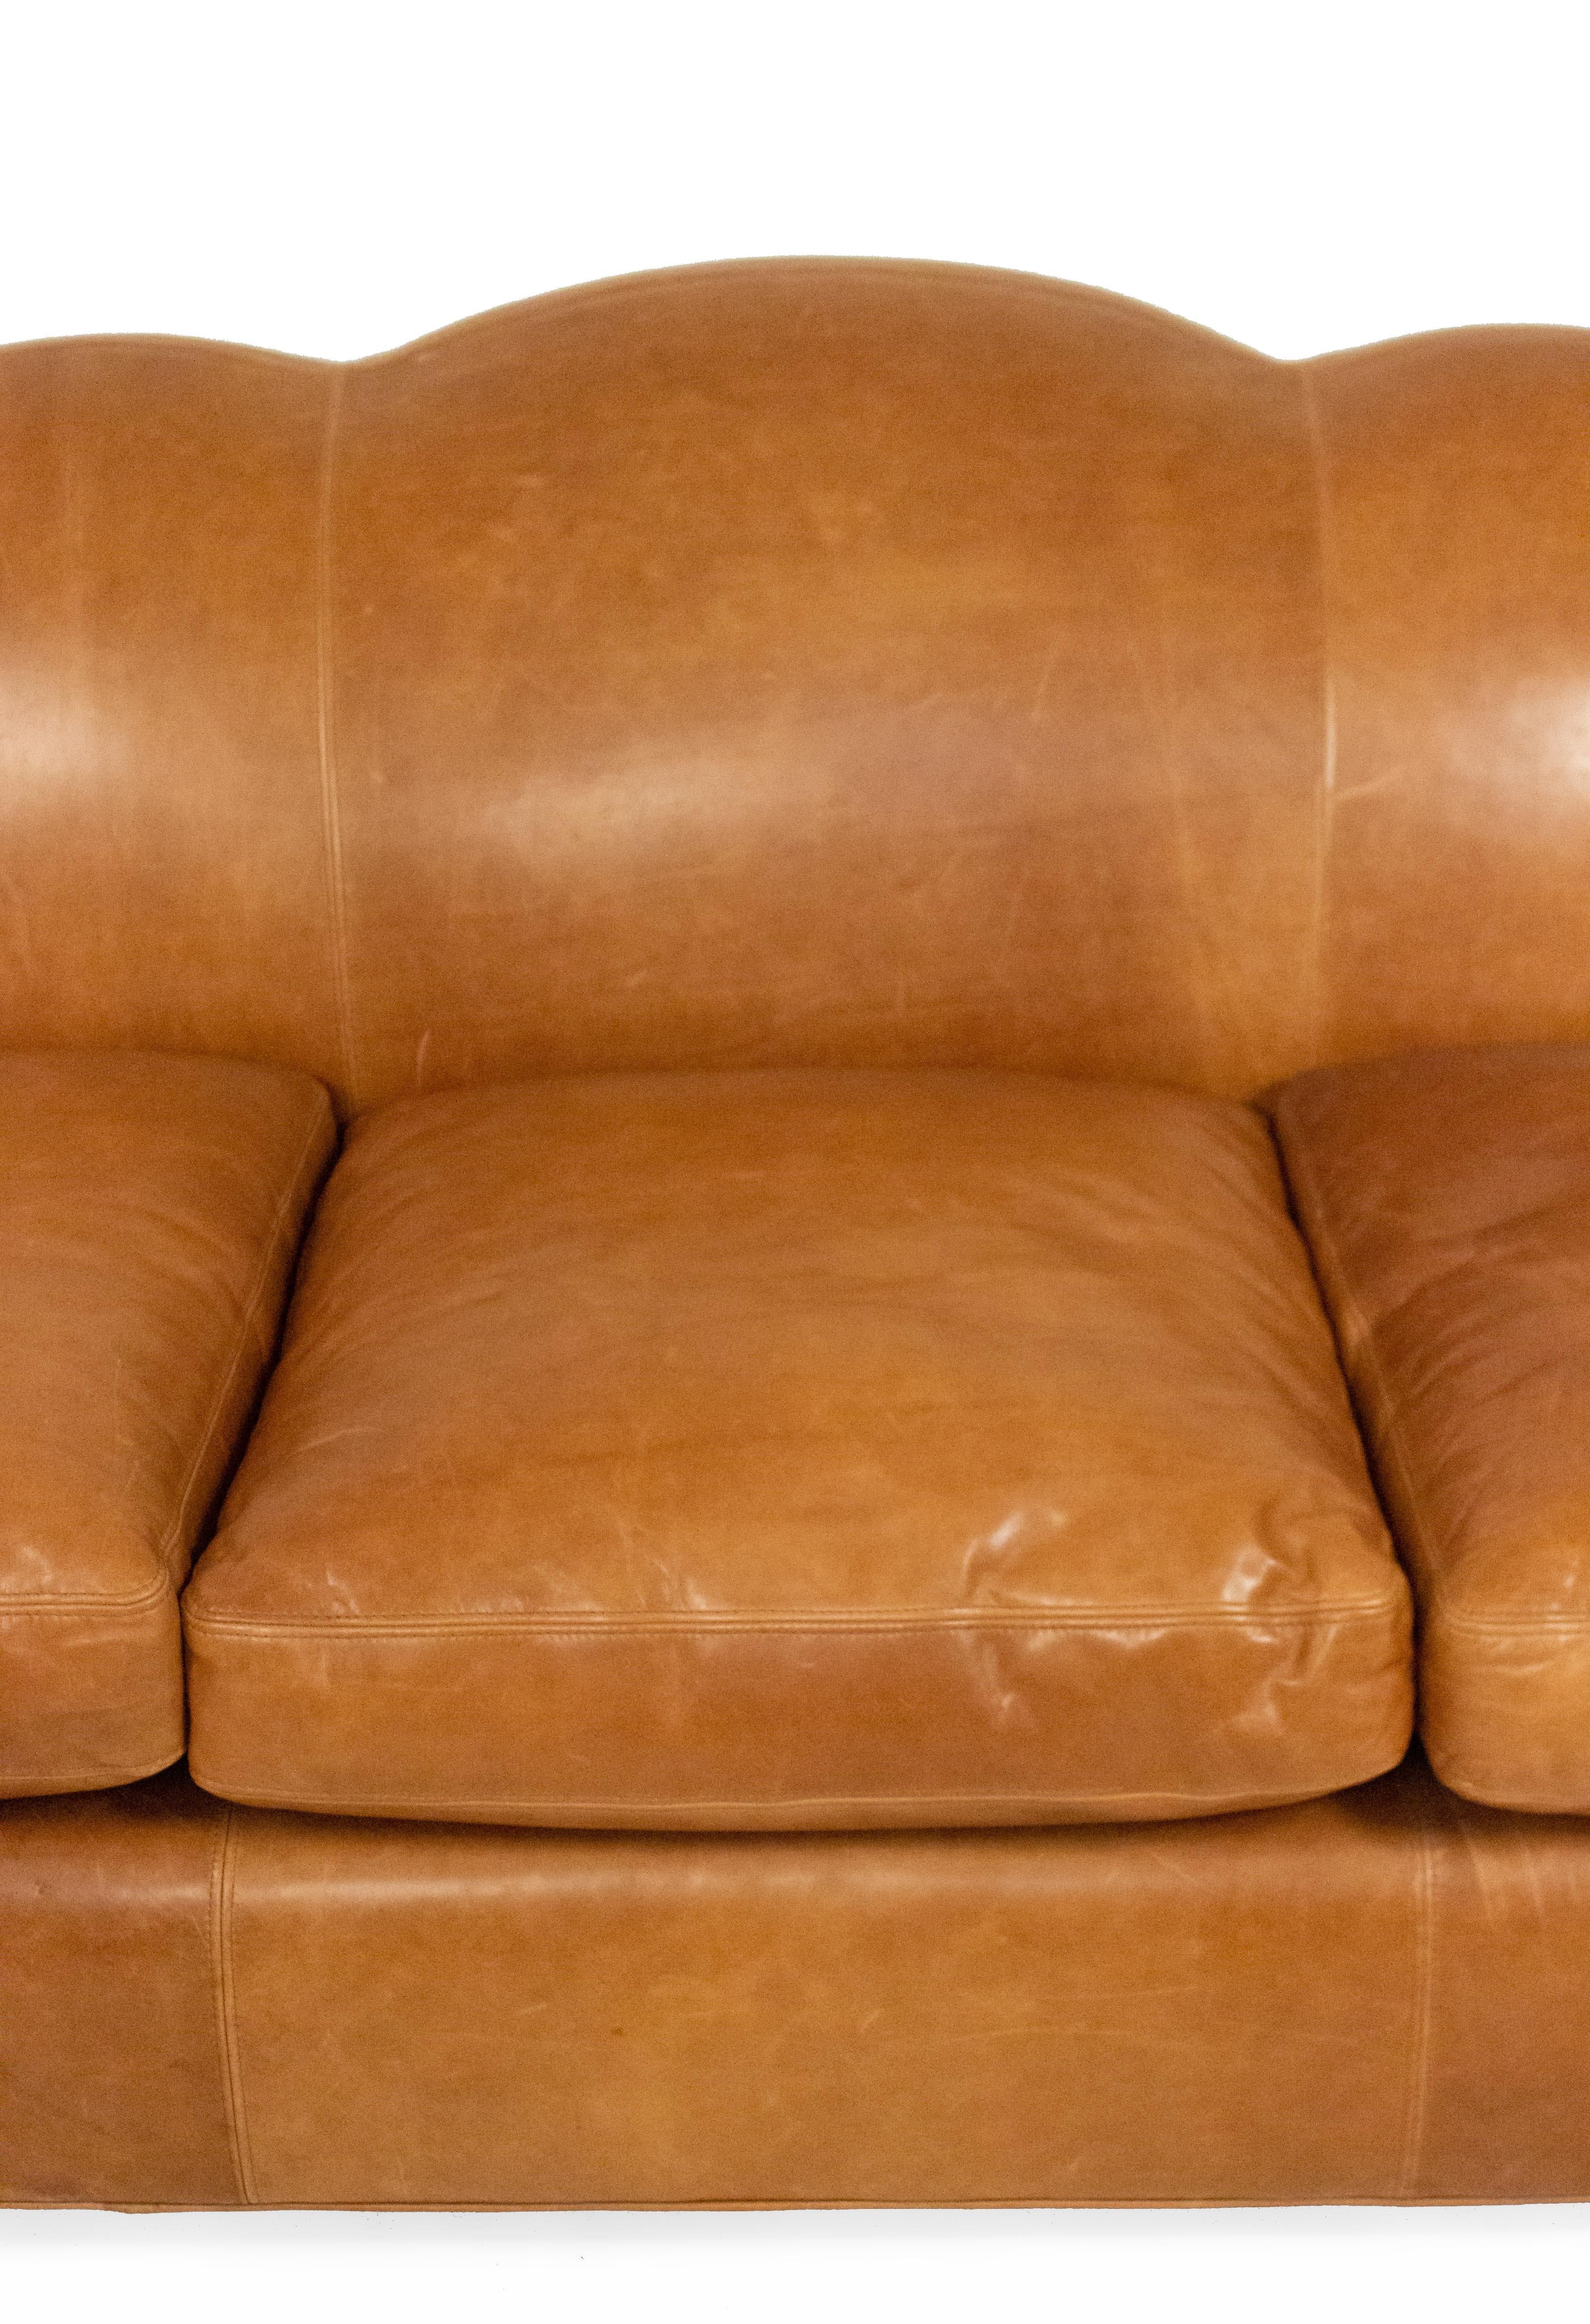 French Art Deco Style Tan Leather Camelback Sofa 1